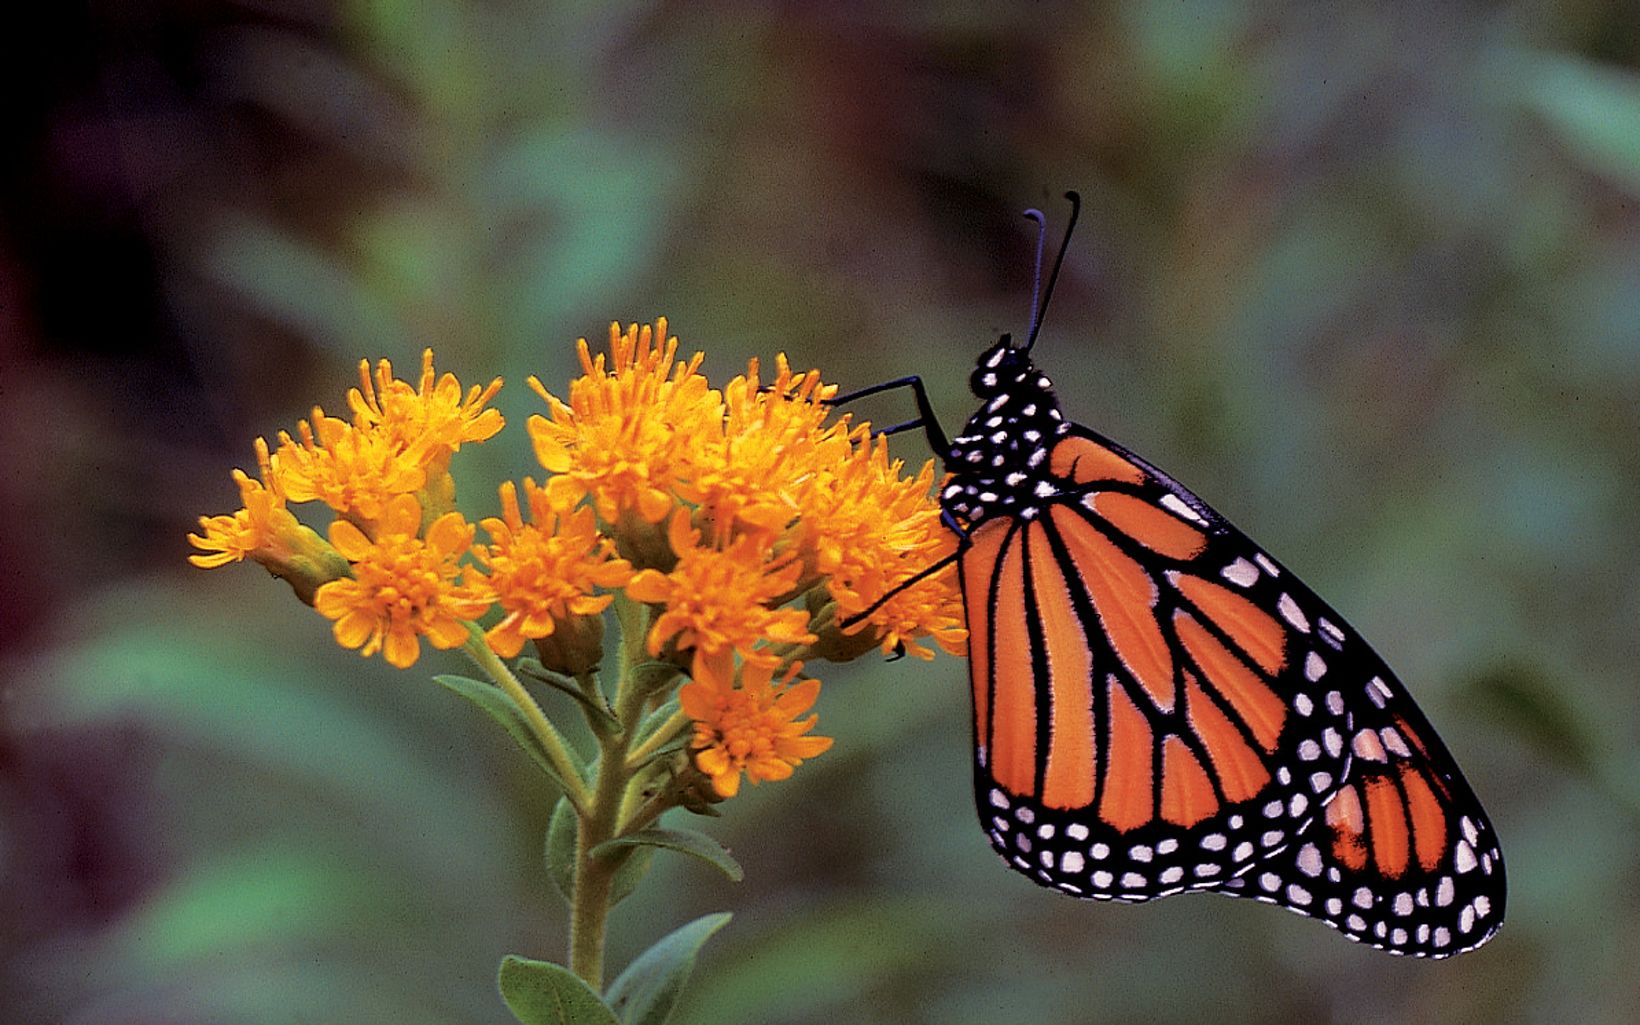  Monarchs and other butterflies feed on nectar from goldenrods and other wildflowers at Chiwaukee Prairie.